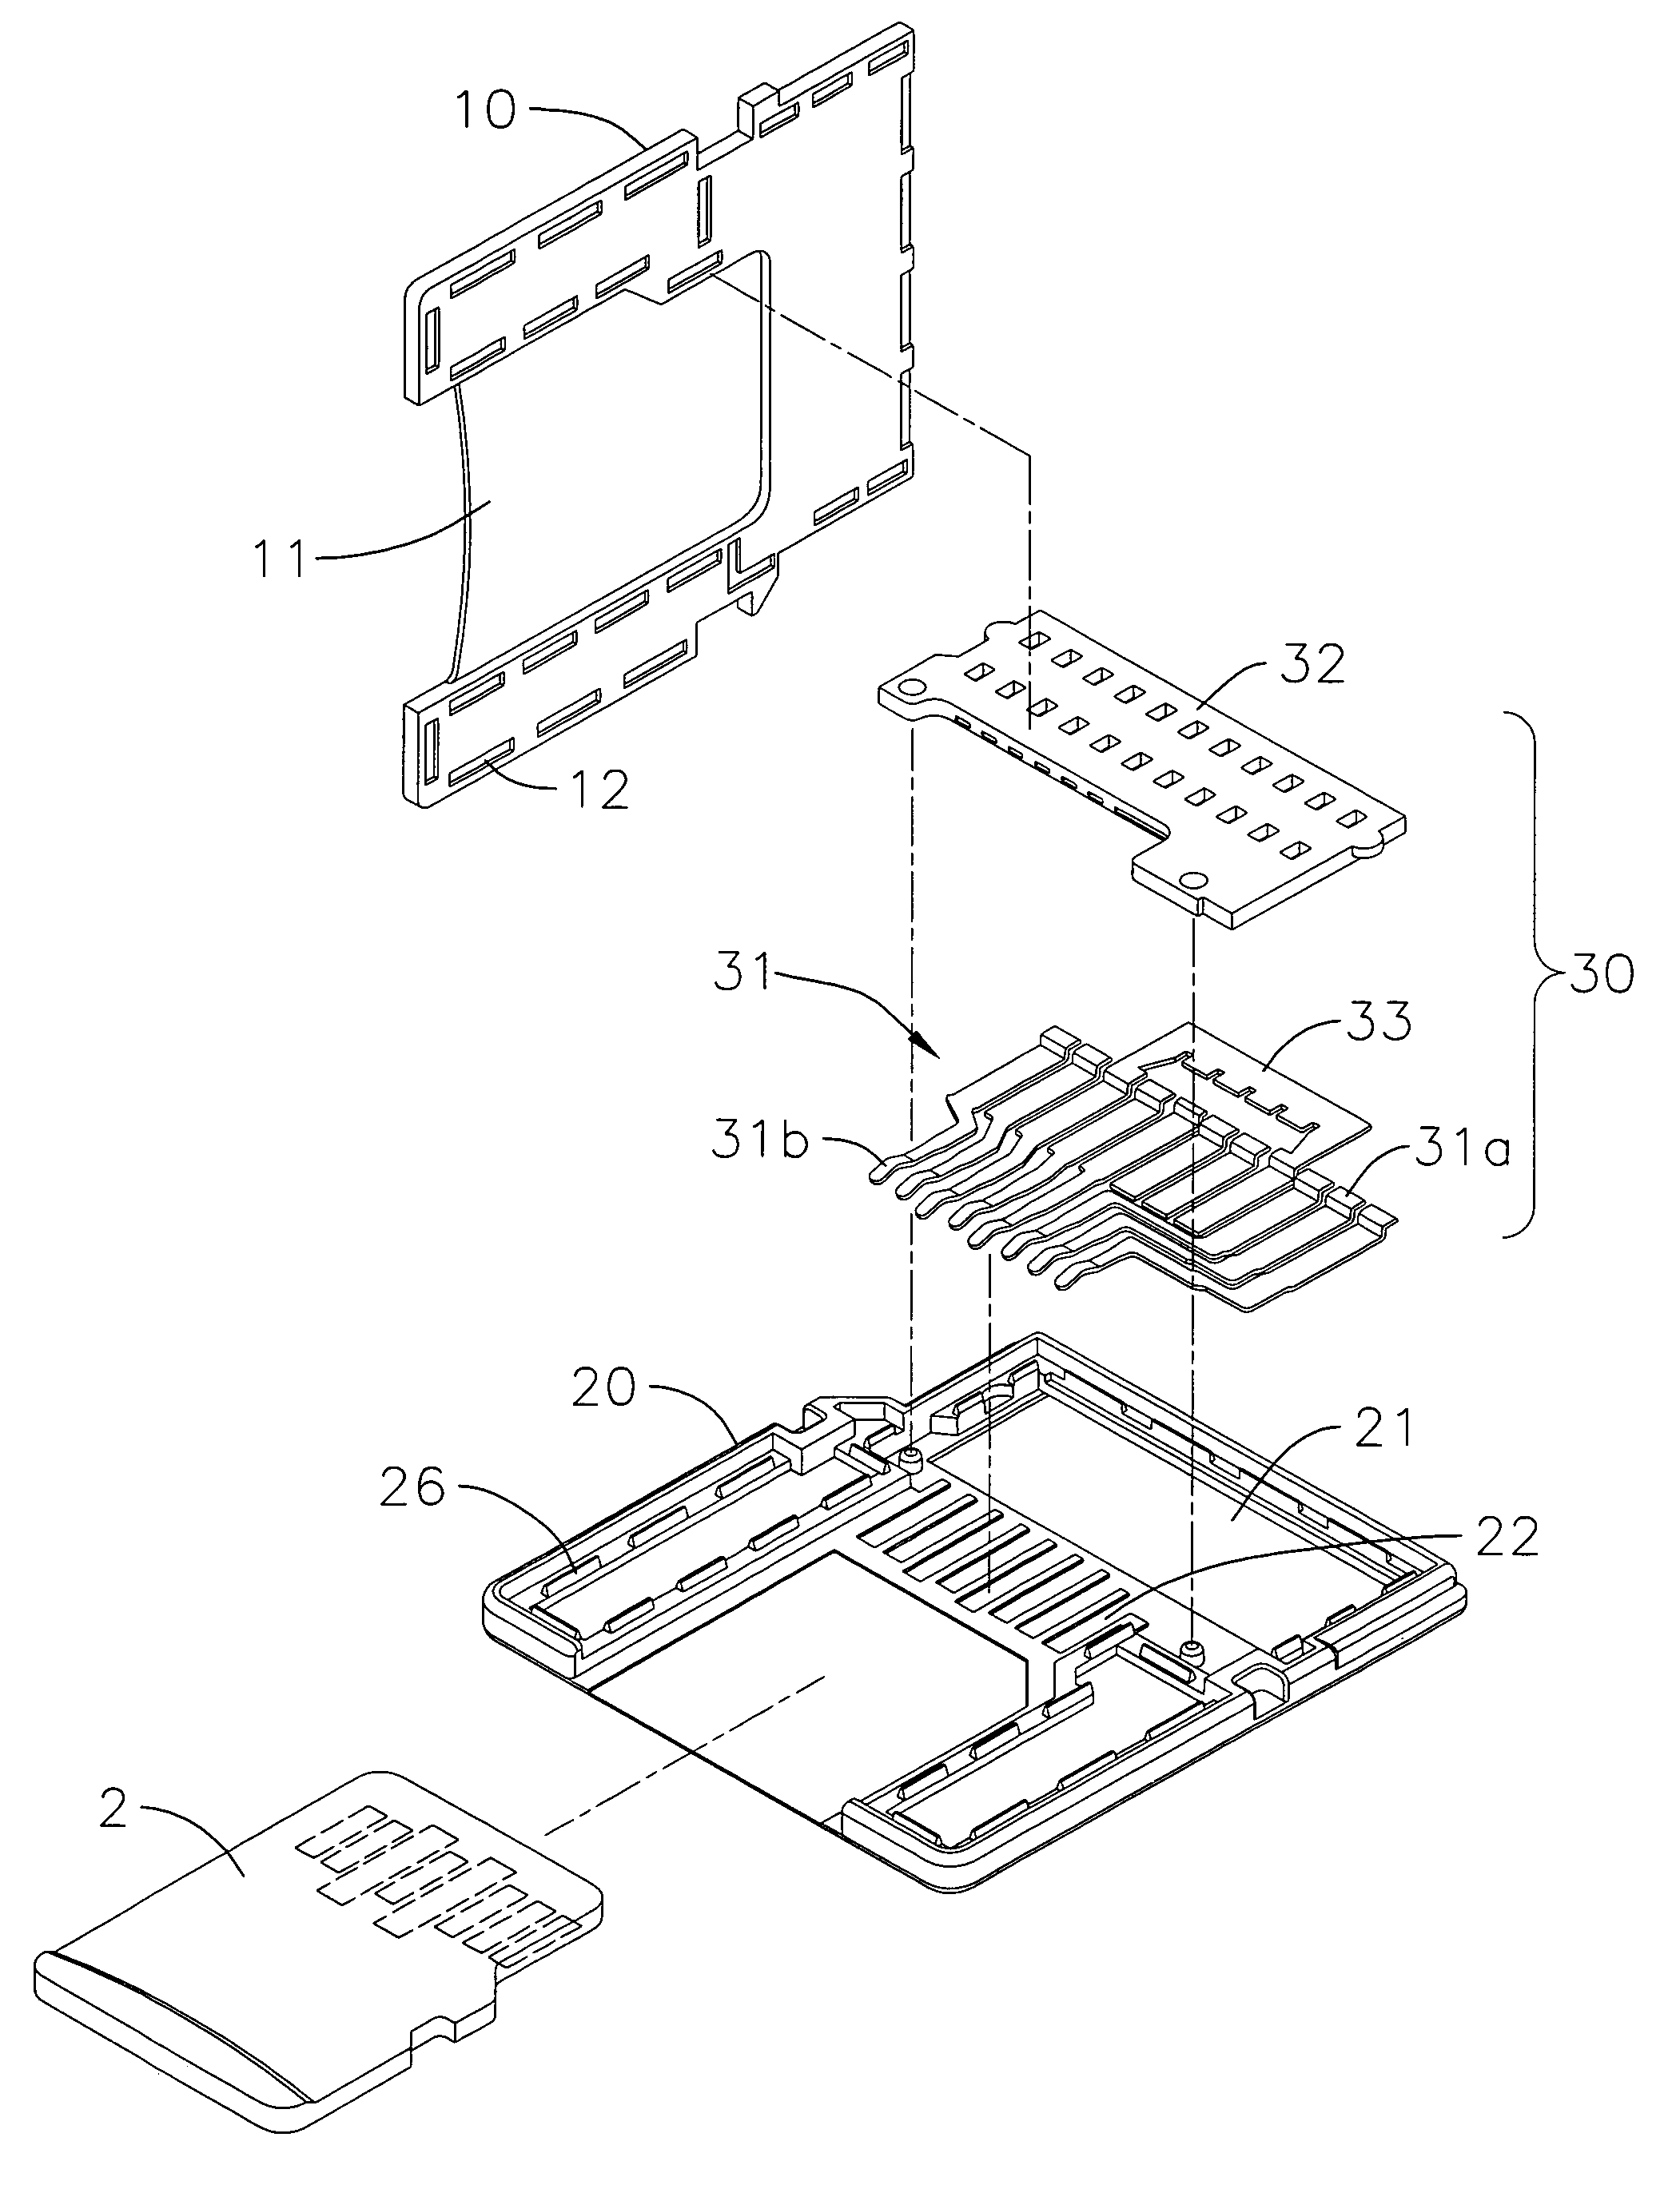 Card adapter structure